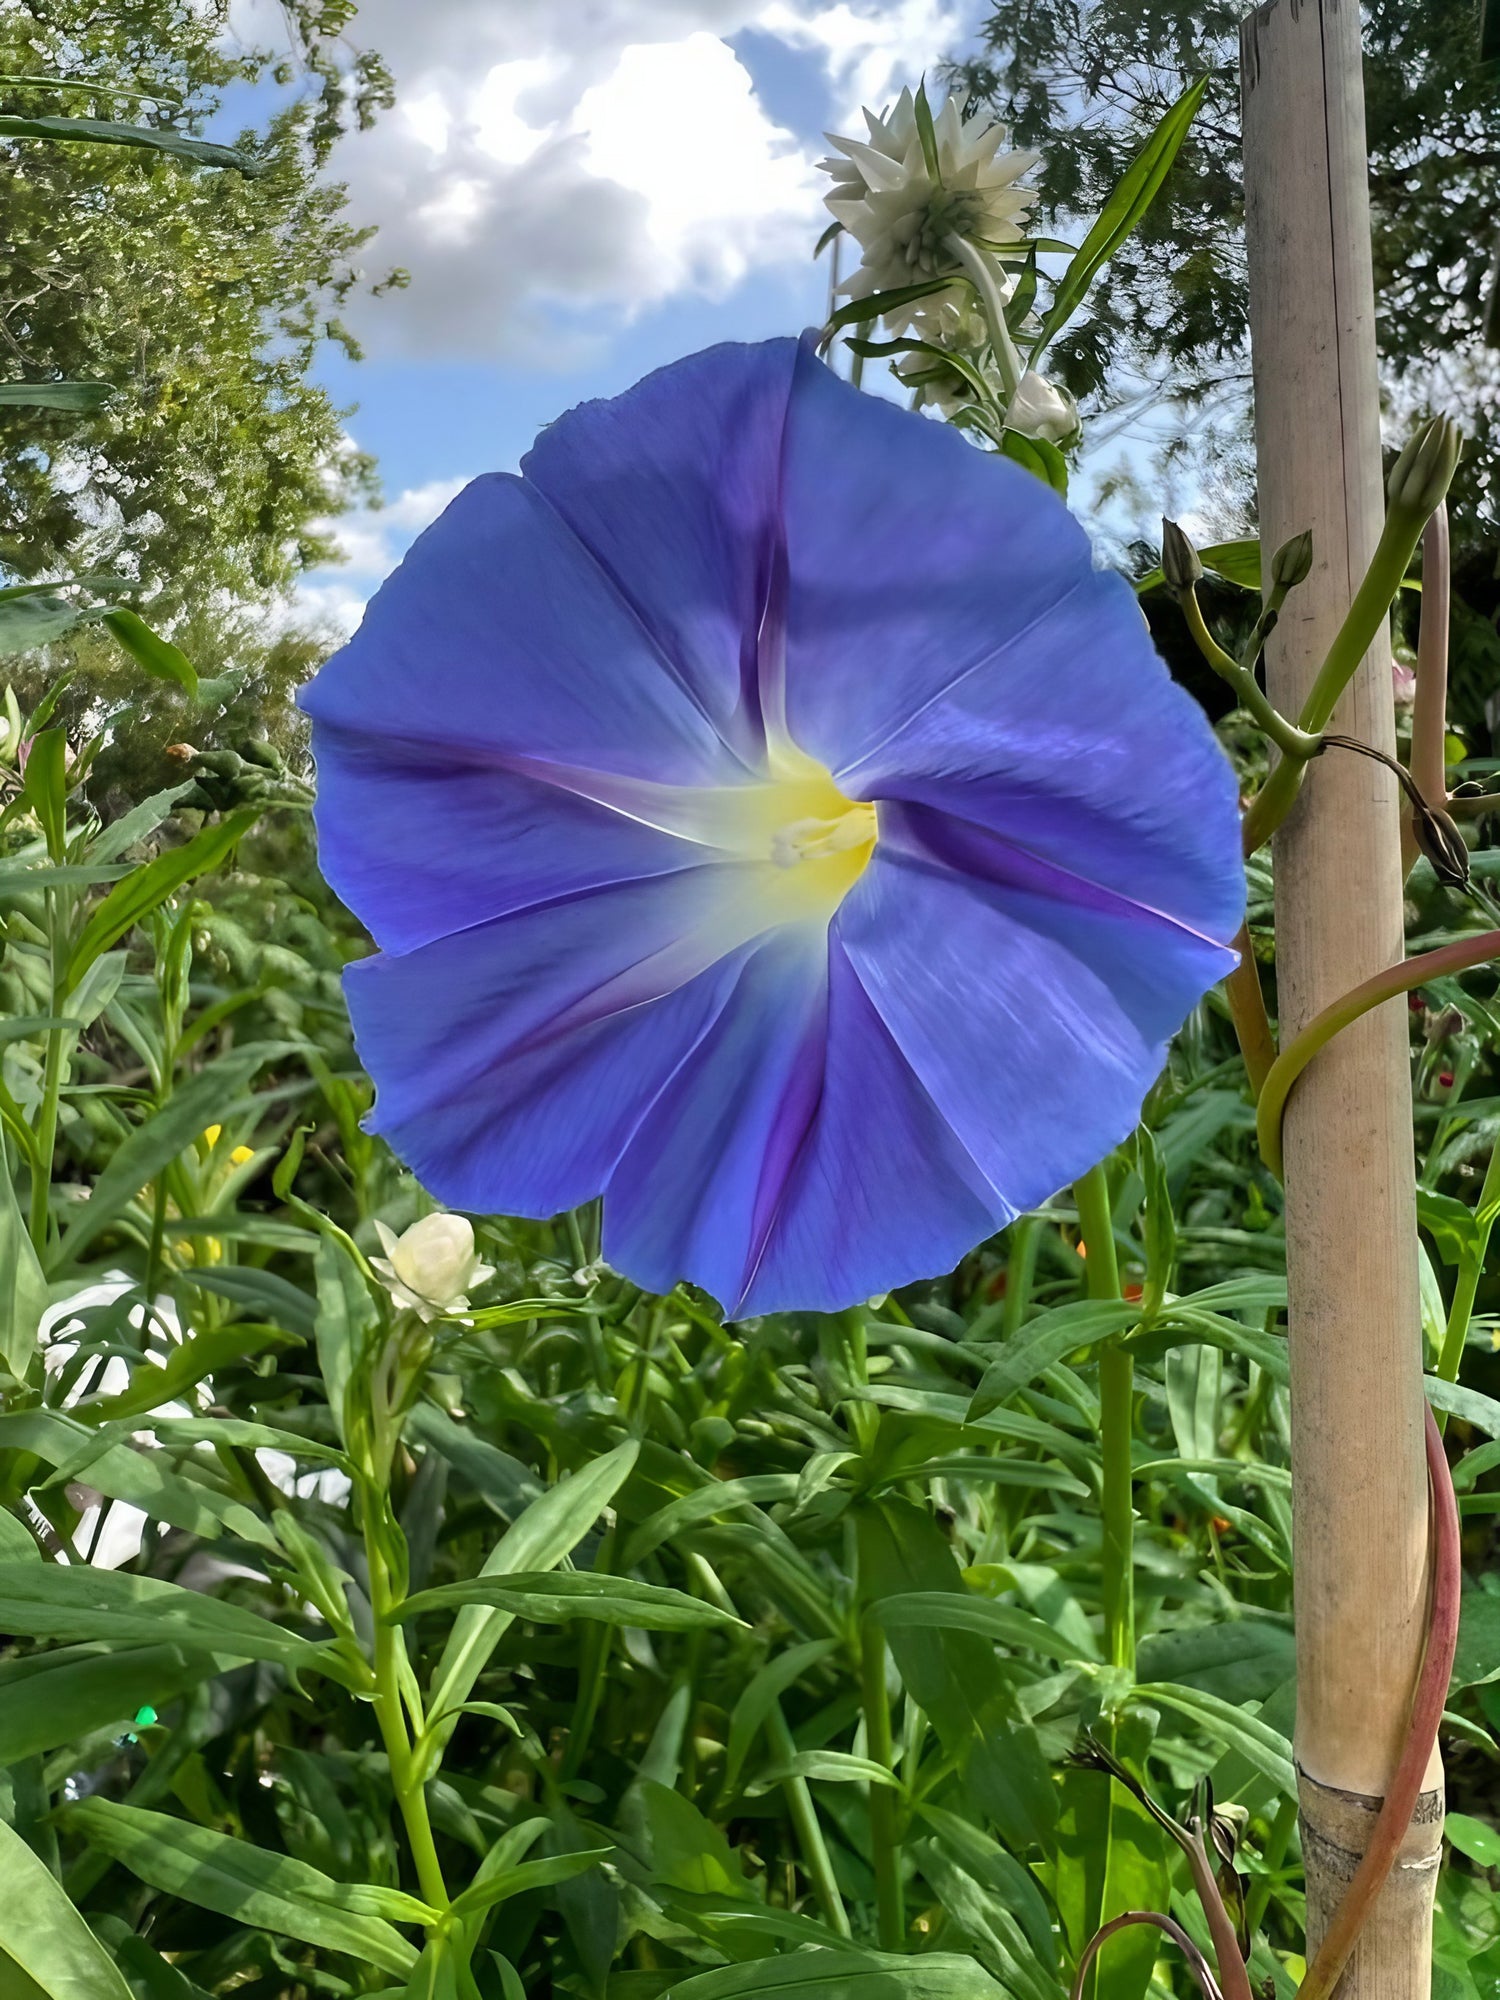 Single Ipomoea Heavenly Blue flower with white to pale blue petals in a garden setting